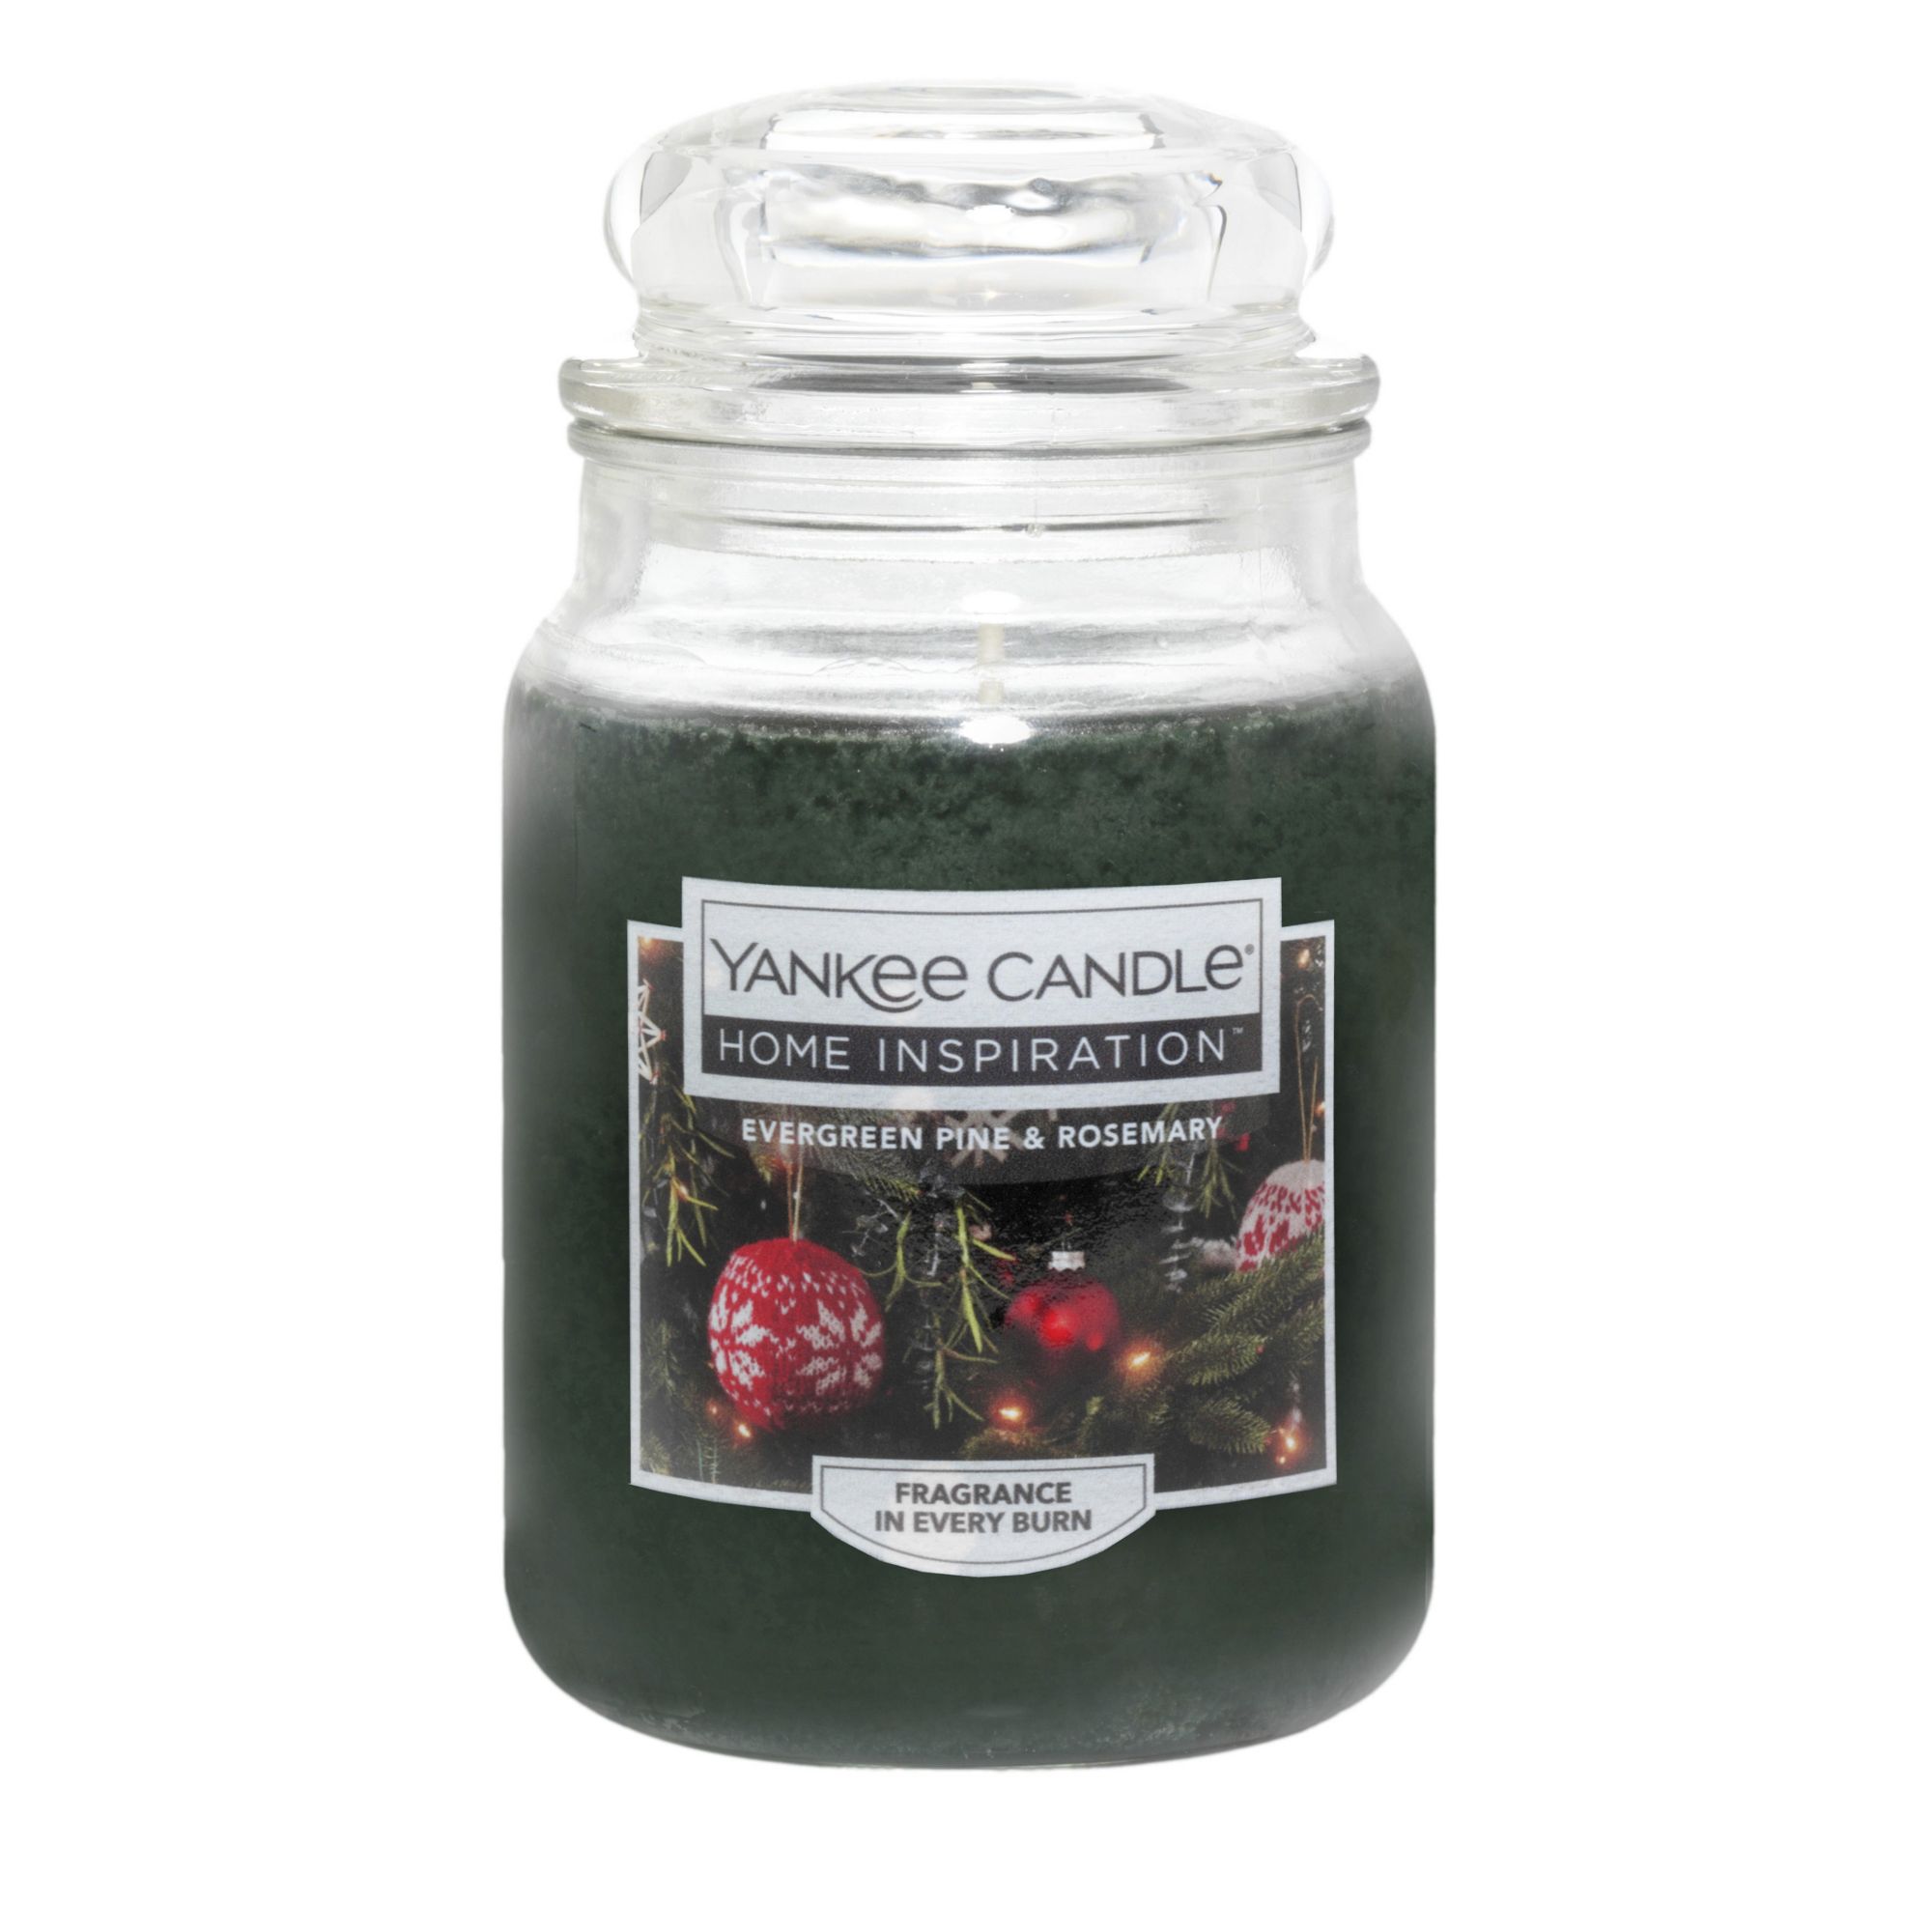 Yankee Candle Jar Candle, 19 oz. - Evergreen Pine and Rosemary